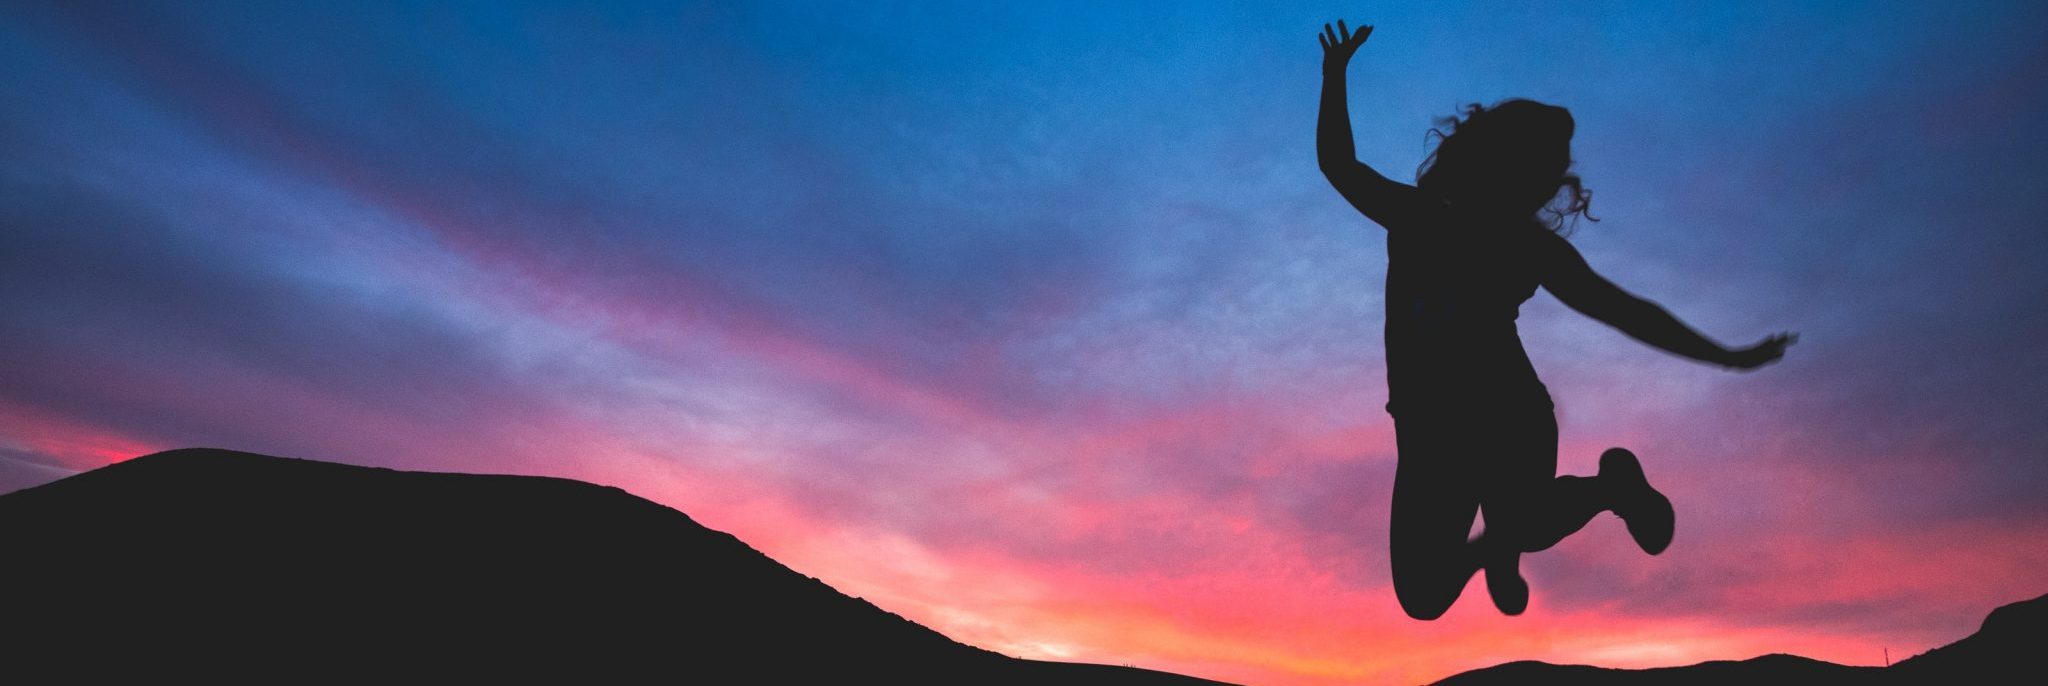 Stock photo silhouette of woman jumping in air